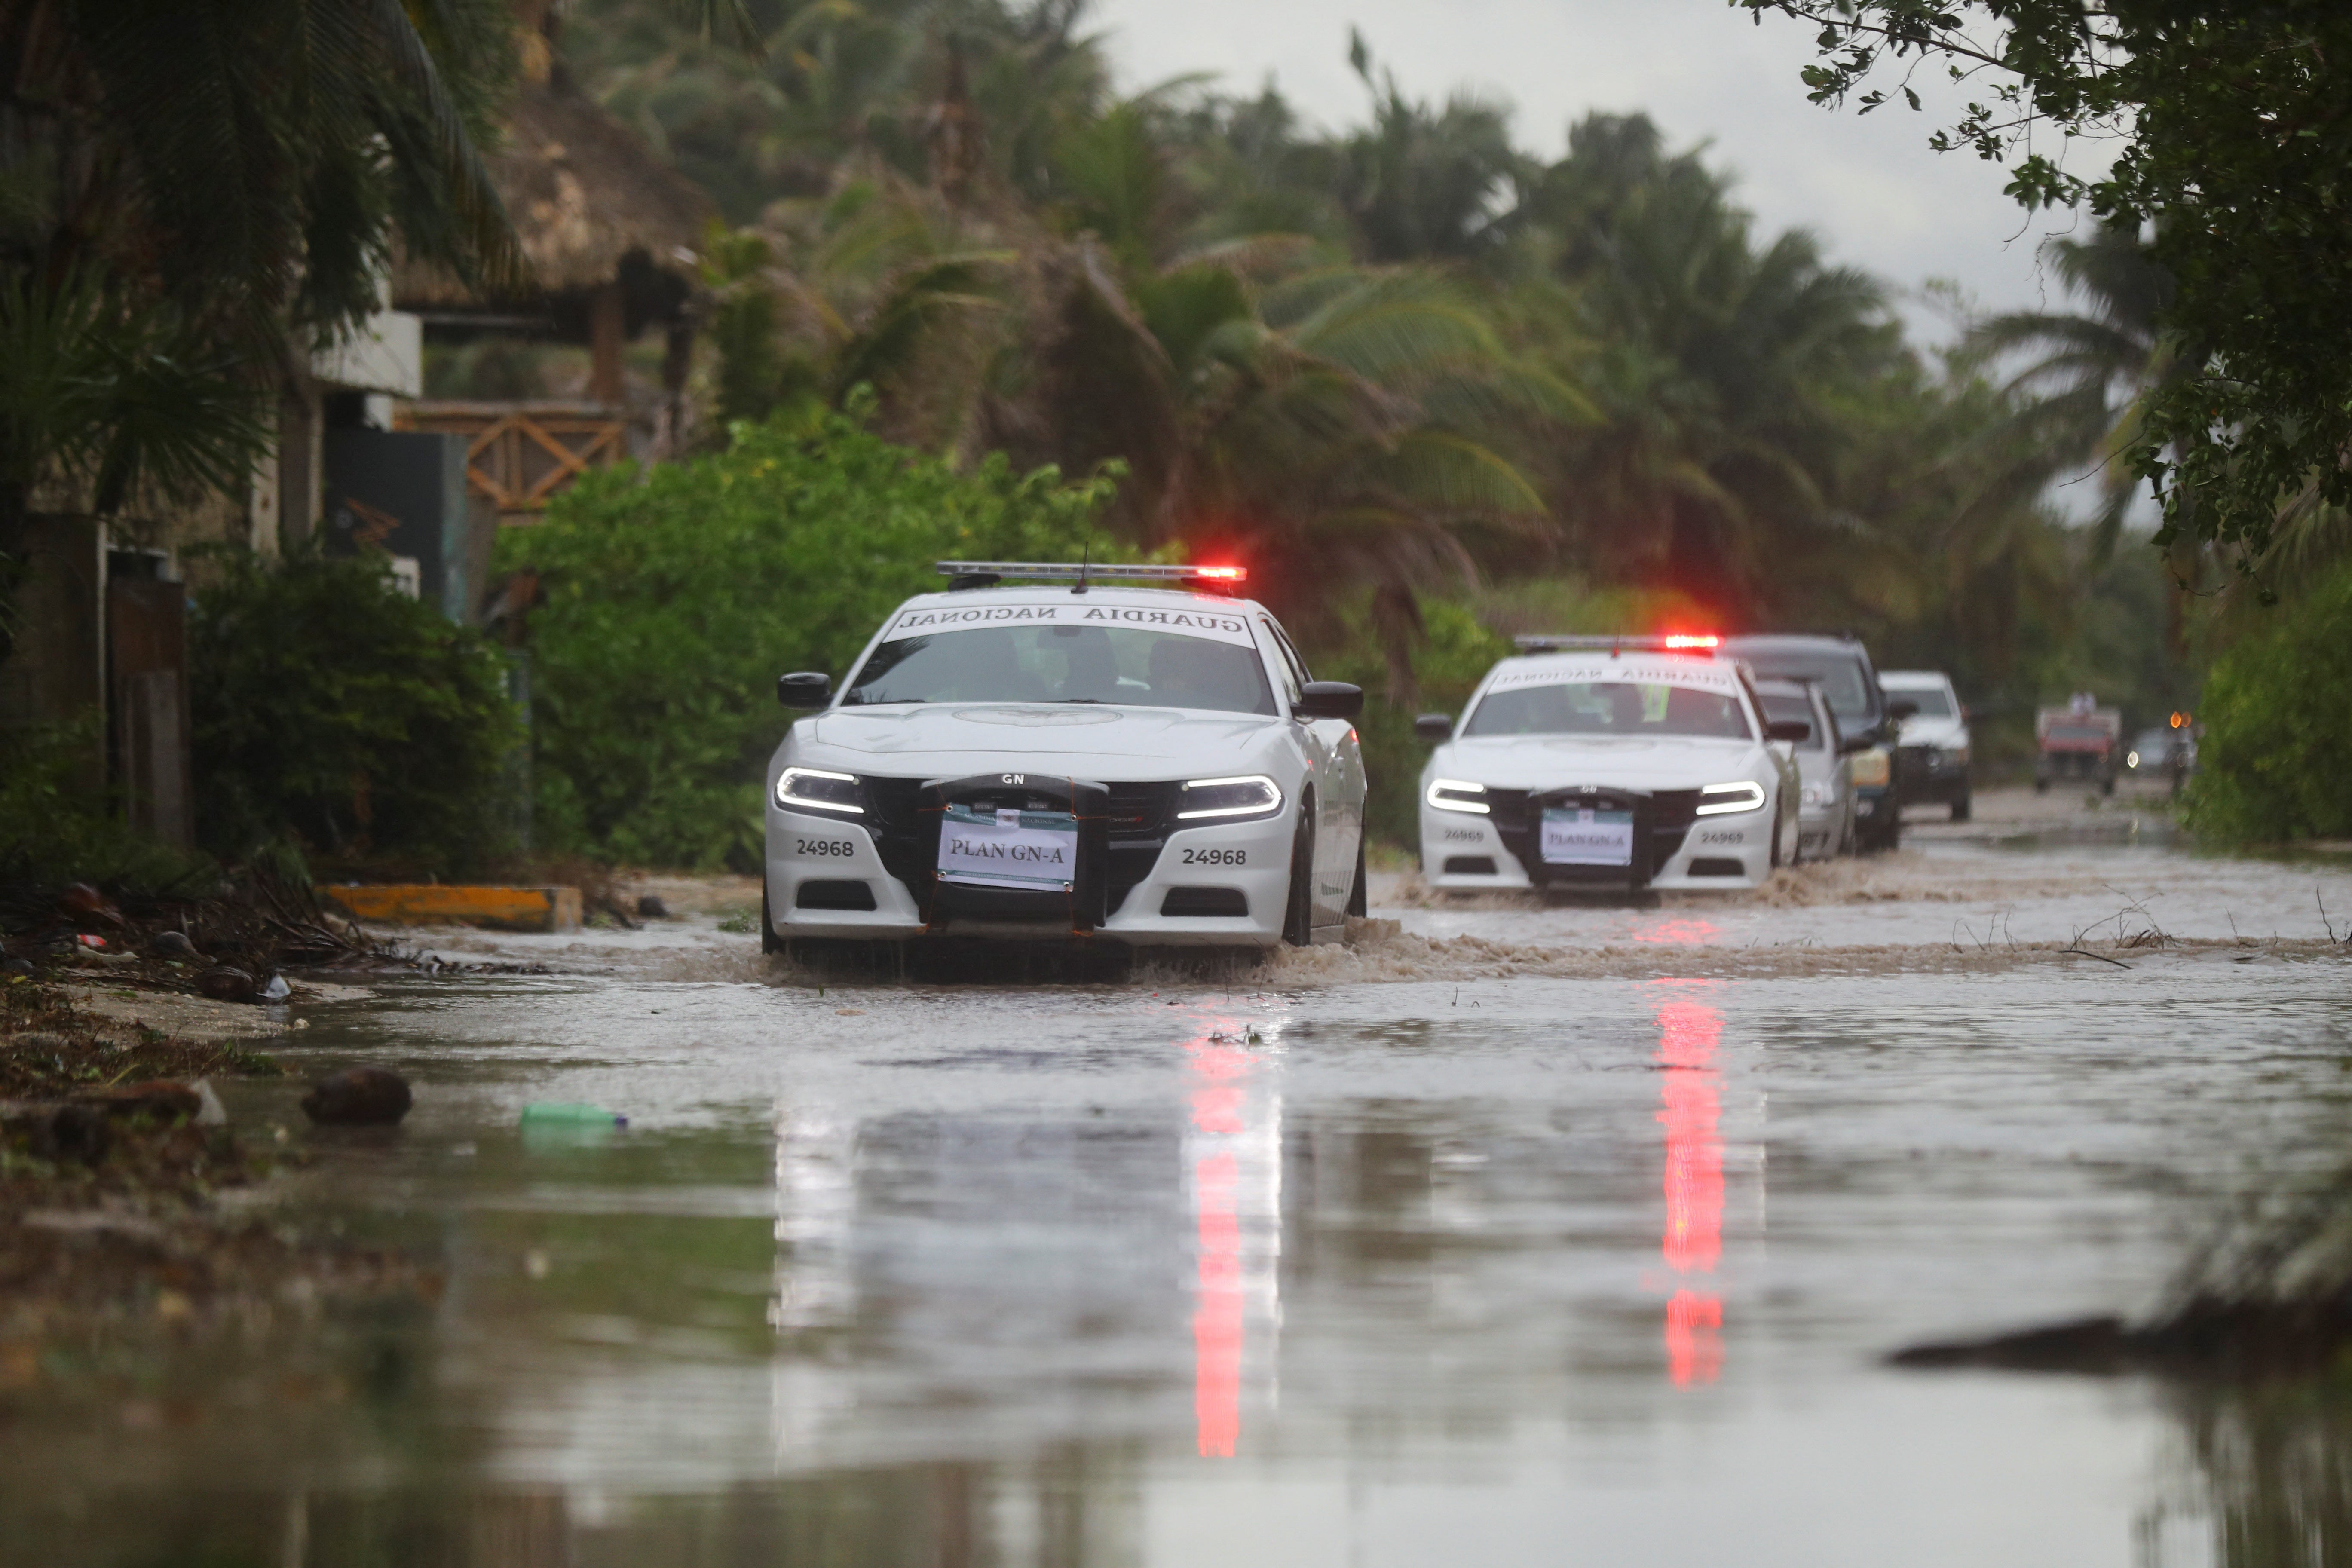 National Guard vehicles drive through flooded streets in Tulum, Mexico on Friday